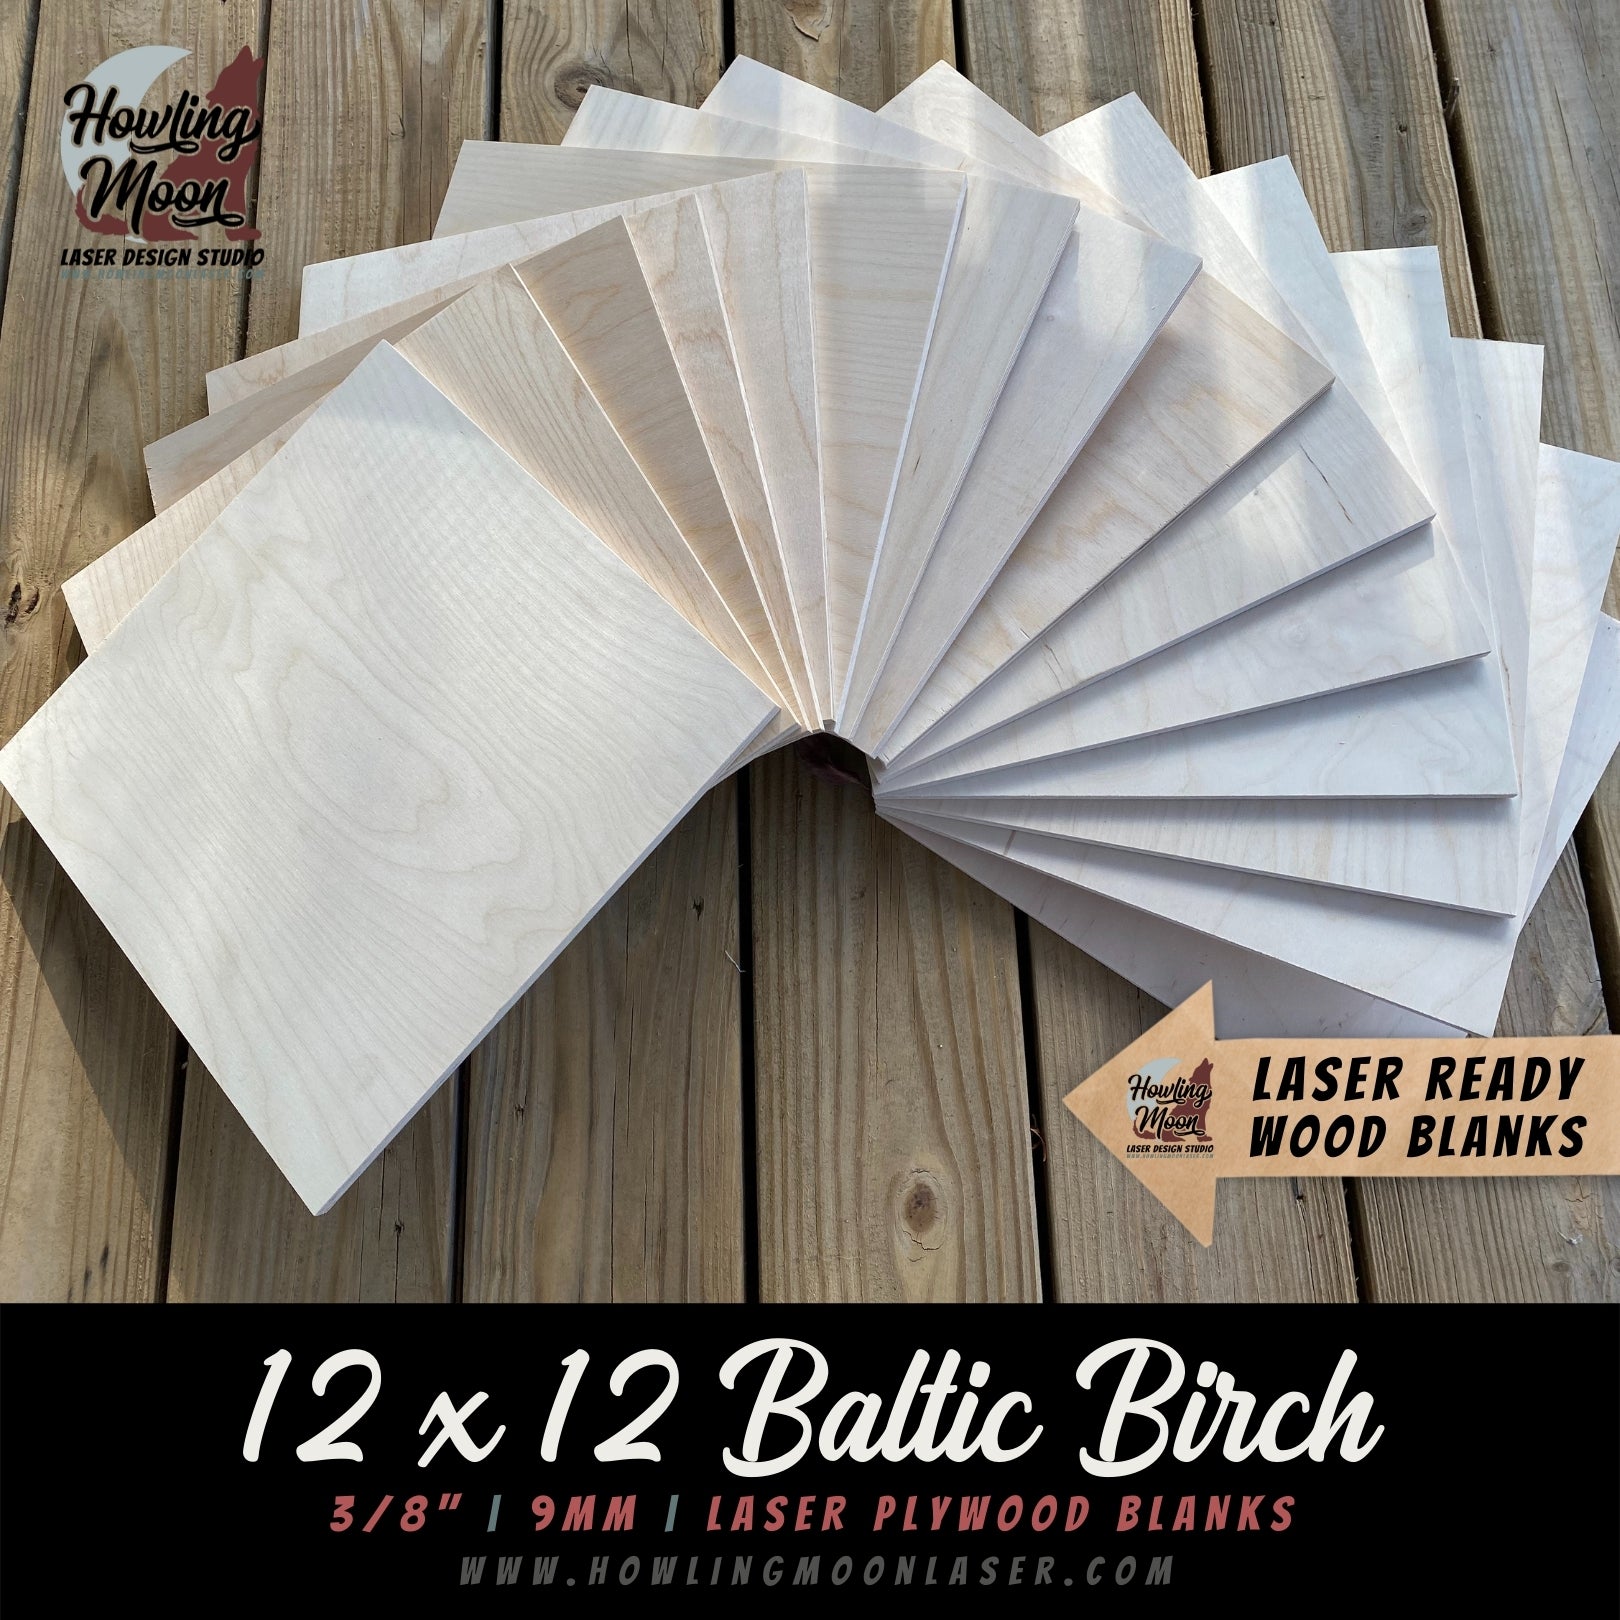 12 x 12 inch Baltic Birch Plywood Blank Squares for Laser Engravers, CNC, Crafters from Howling Moon Laser Design